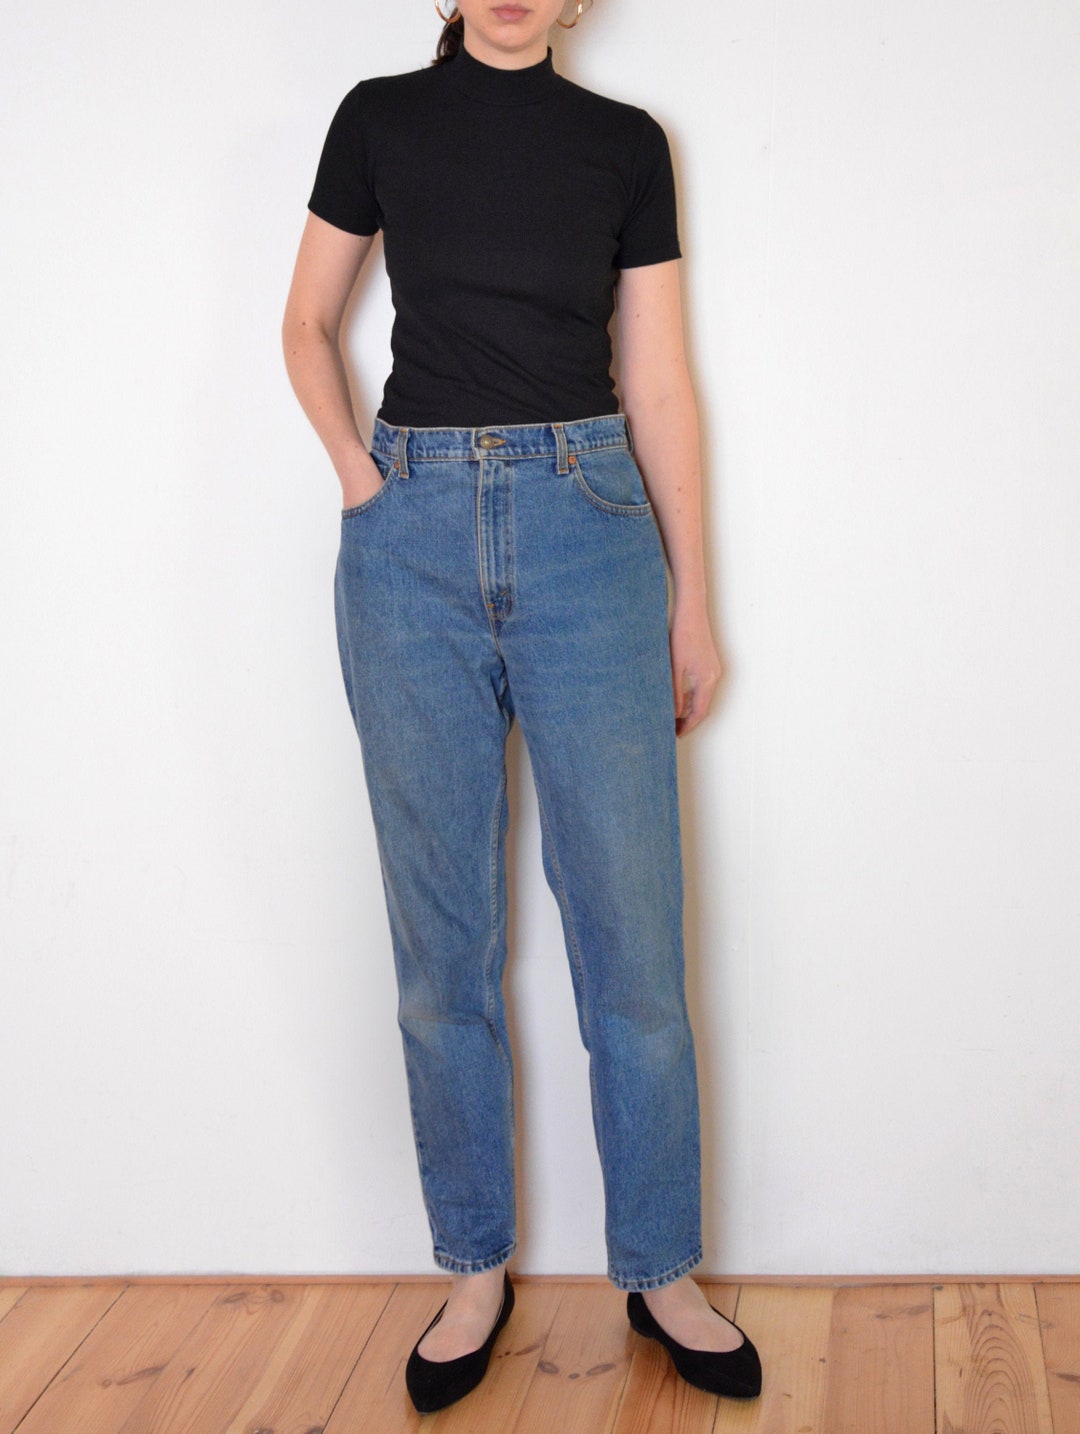 90's Levis 551 Denim Pants High Waisted Relaxed Fit Mom - Etsy